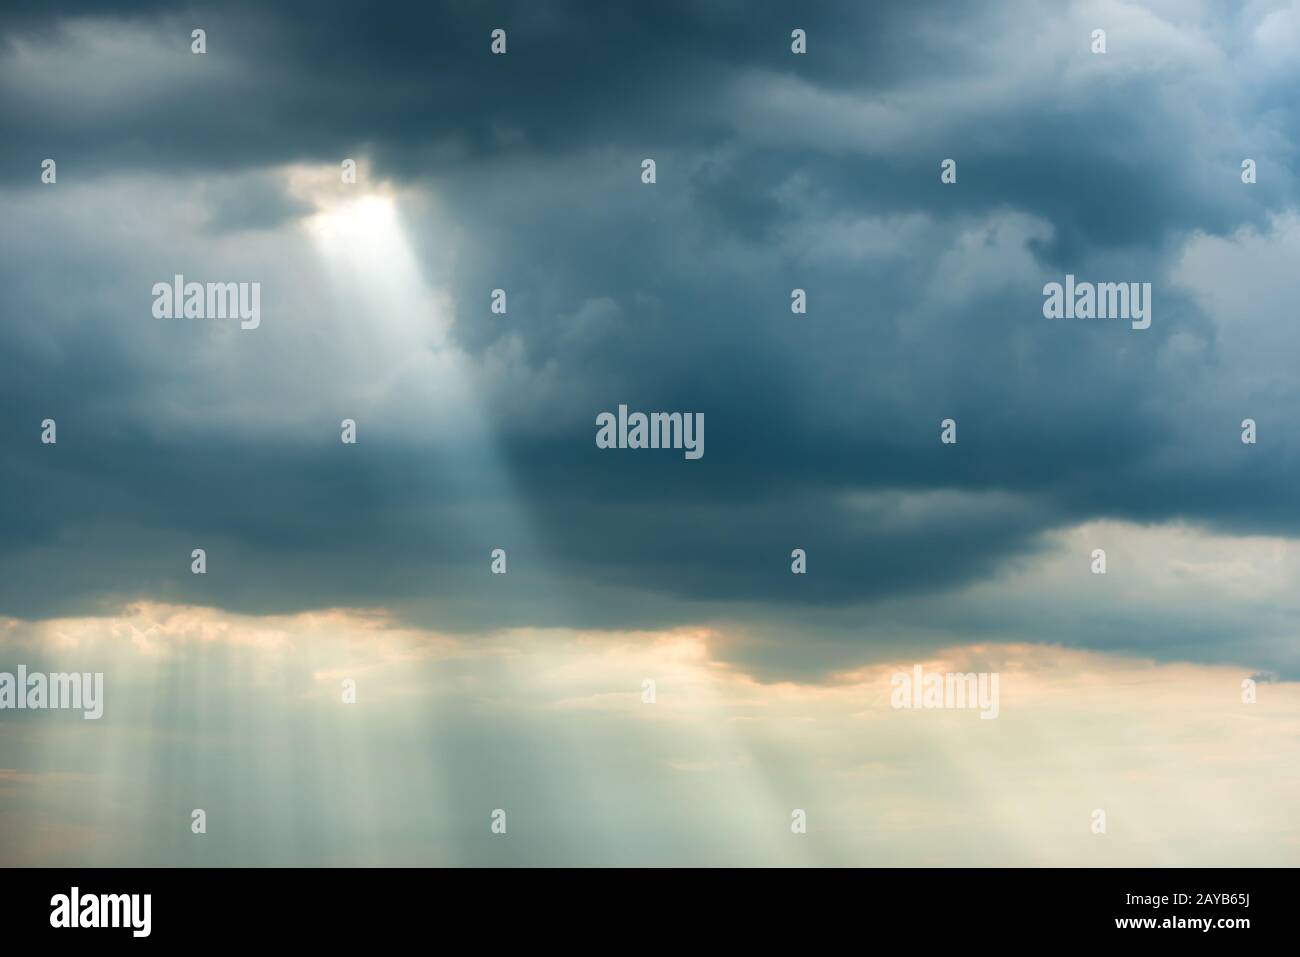 Dramatic storm sky with dark clouds and bright sunbeams Stock Photo